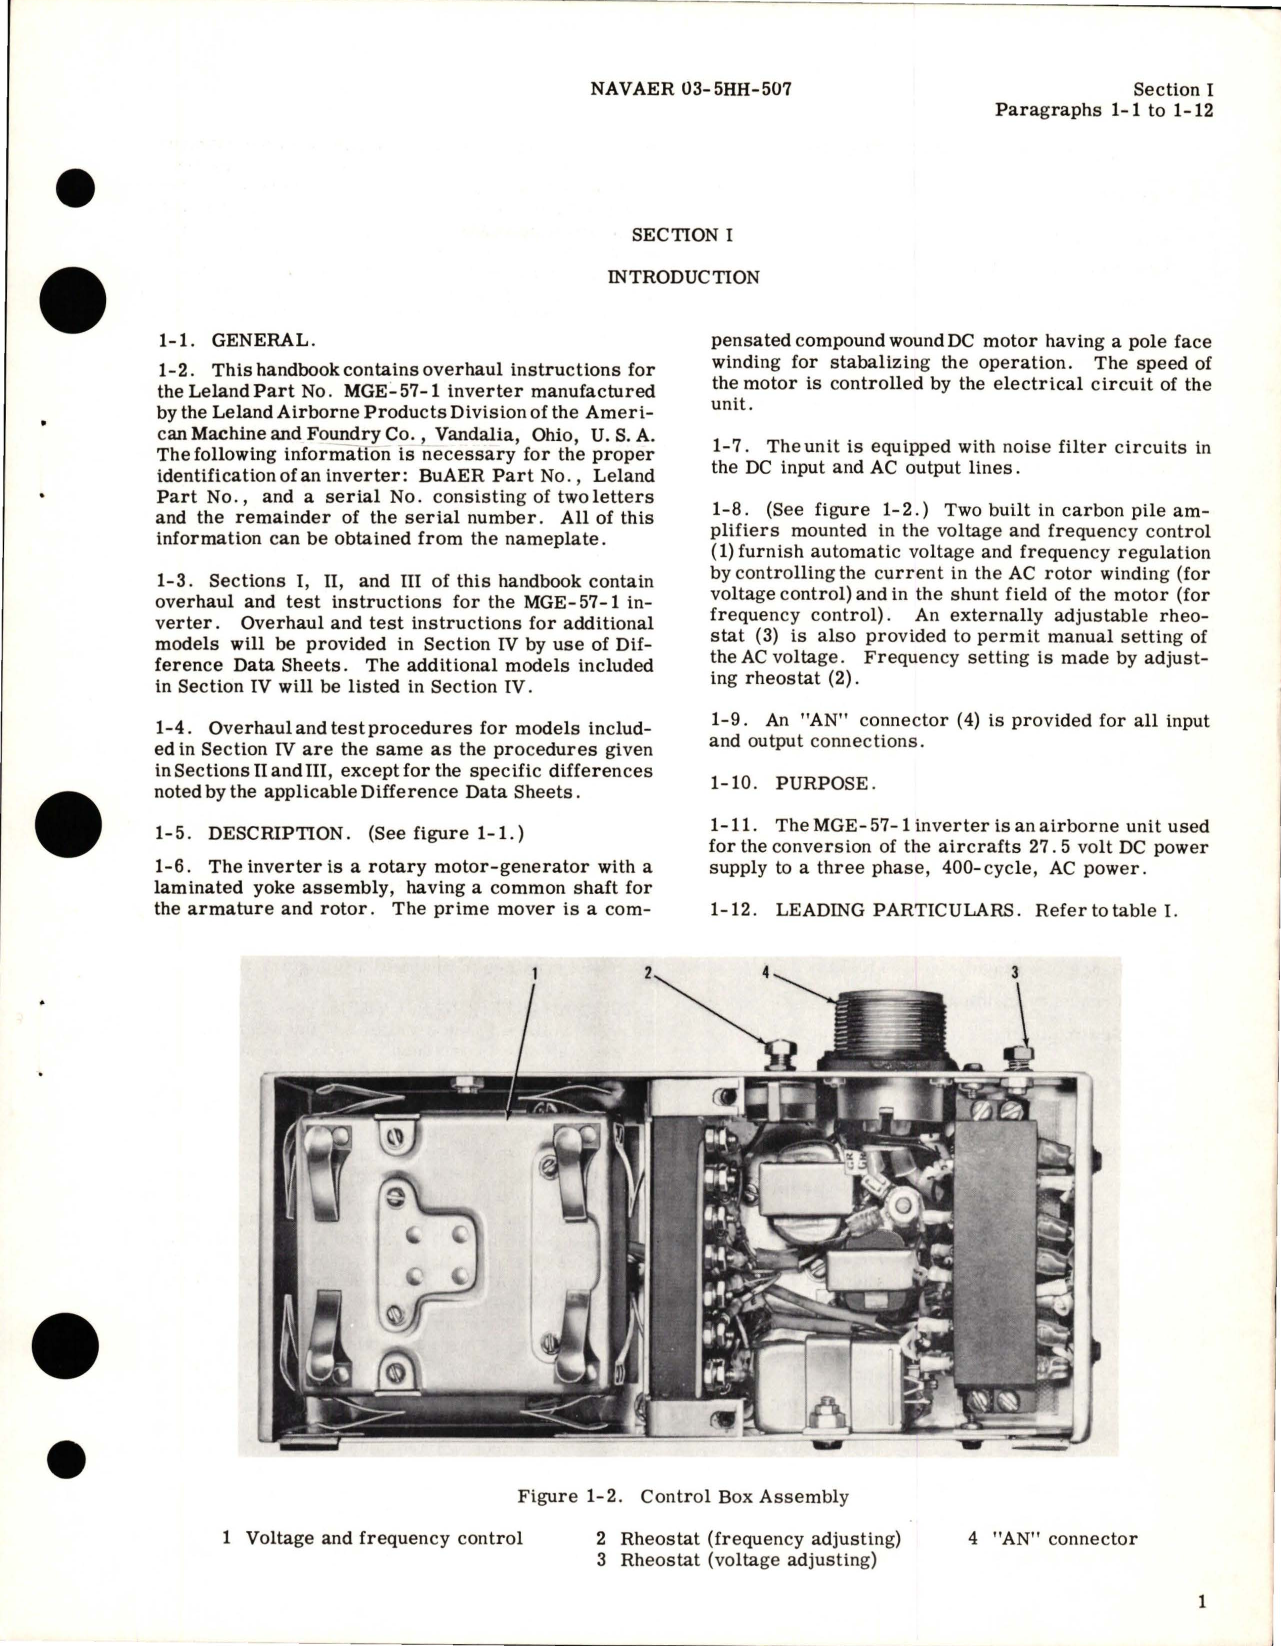 Sample page 5 from AirCorps Library document: Overhaul Instructions for Inverter - Part MGE-57-1